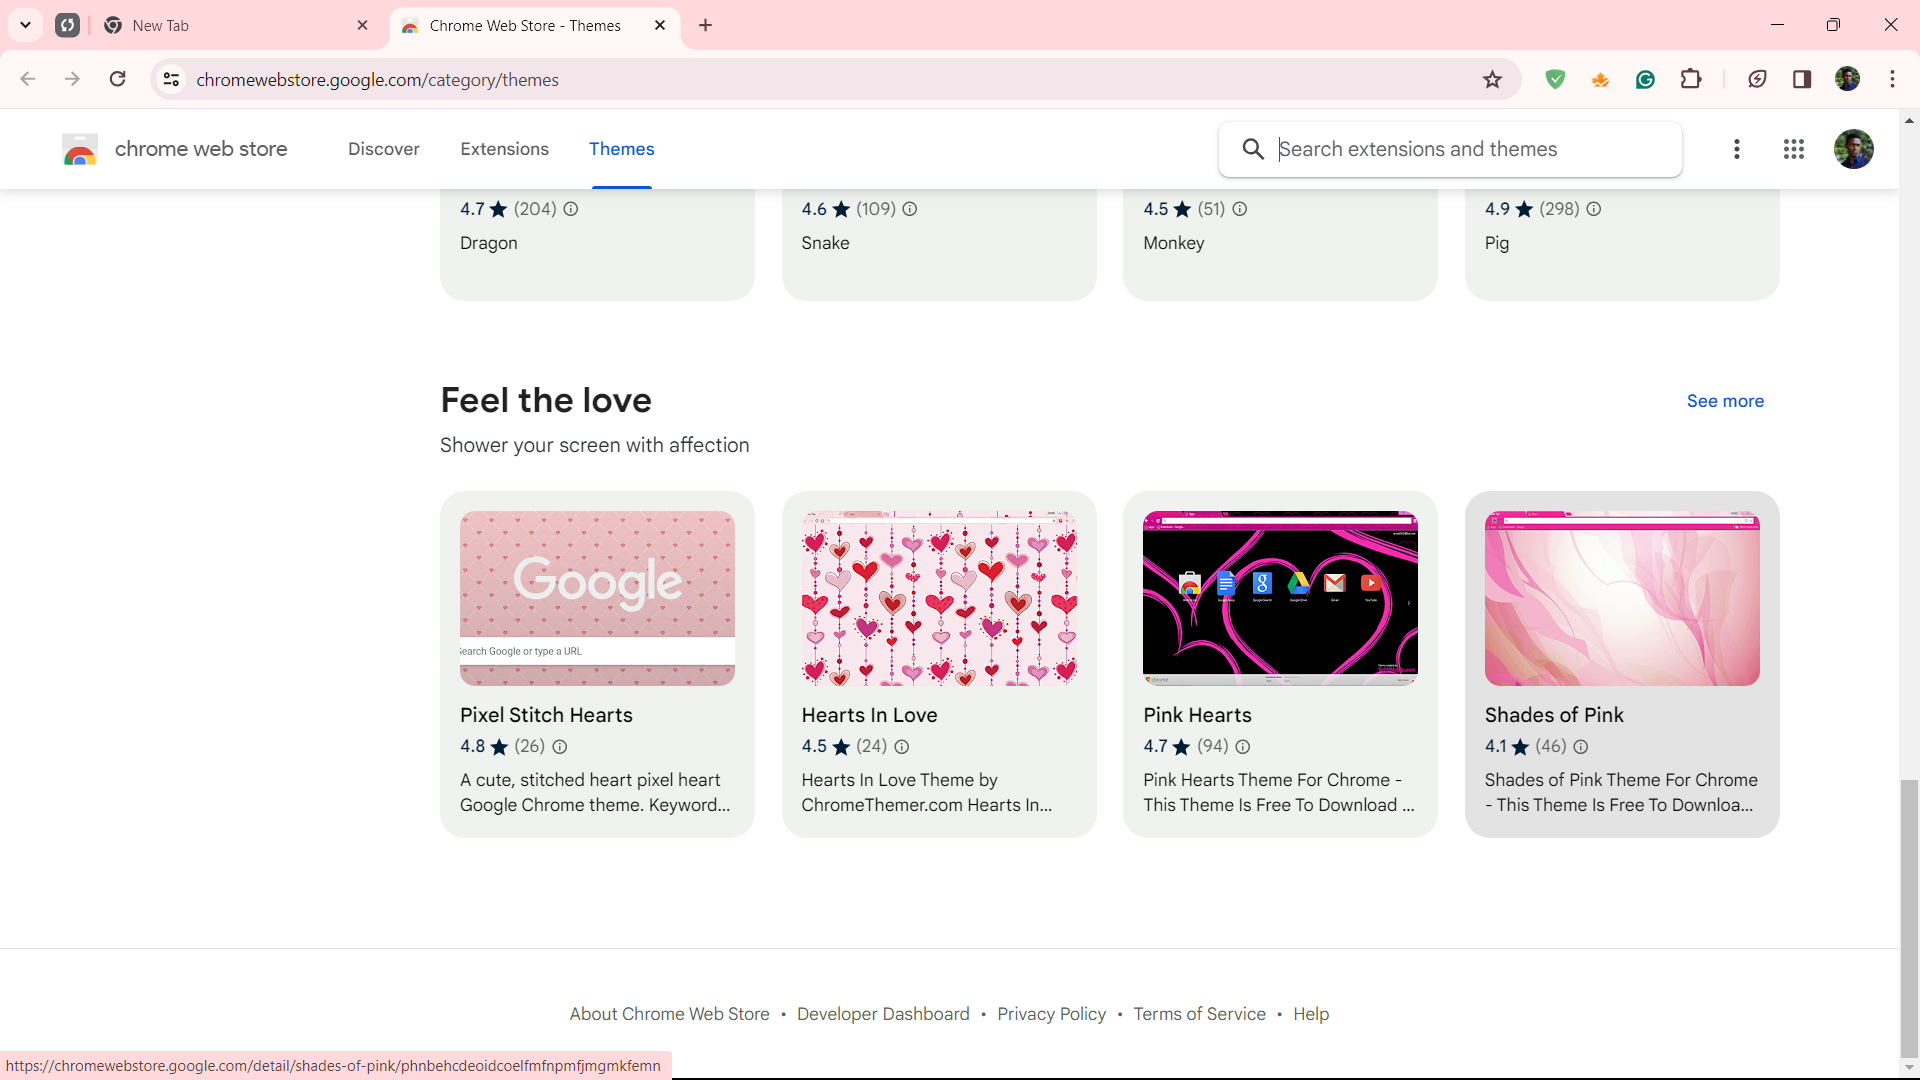 Selecting a theme in the Chrome Web Store